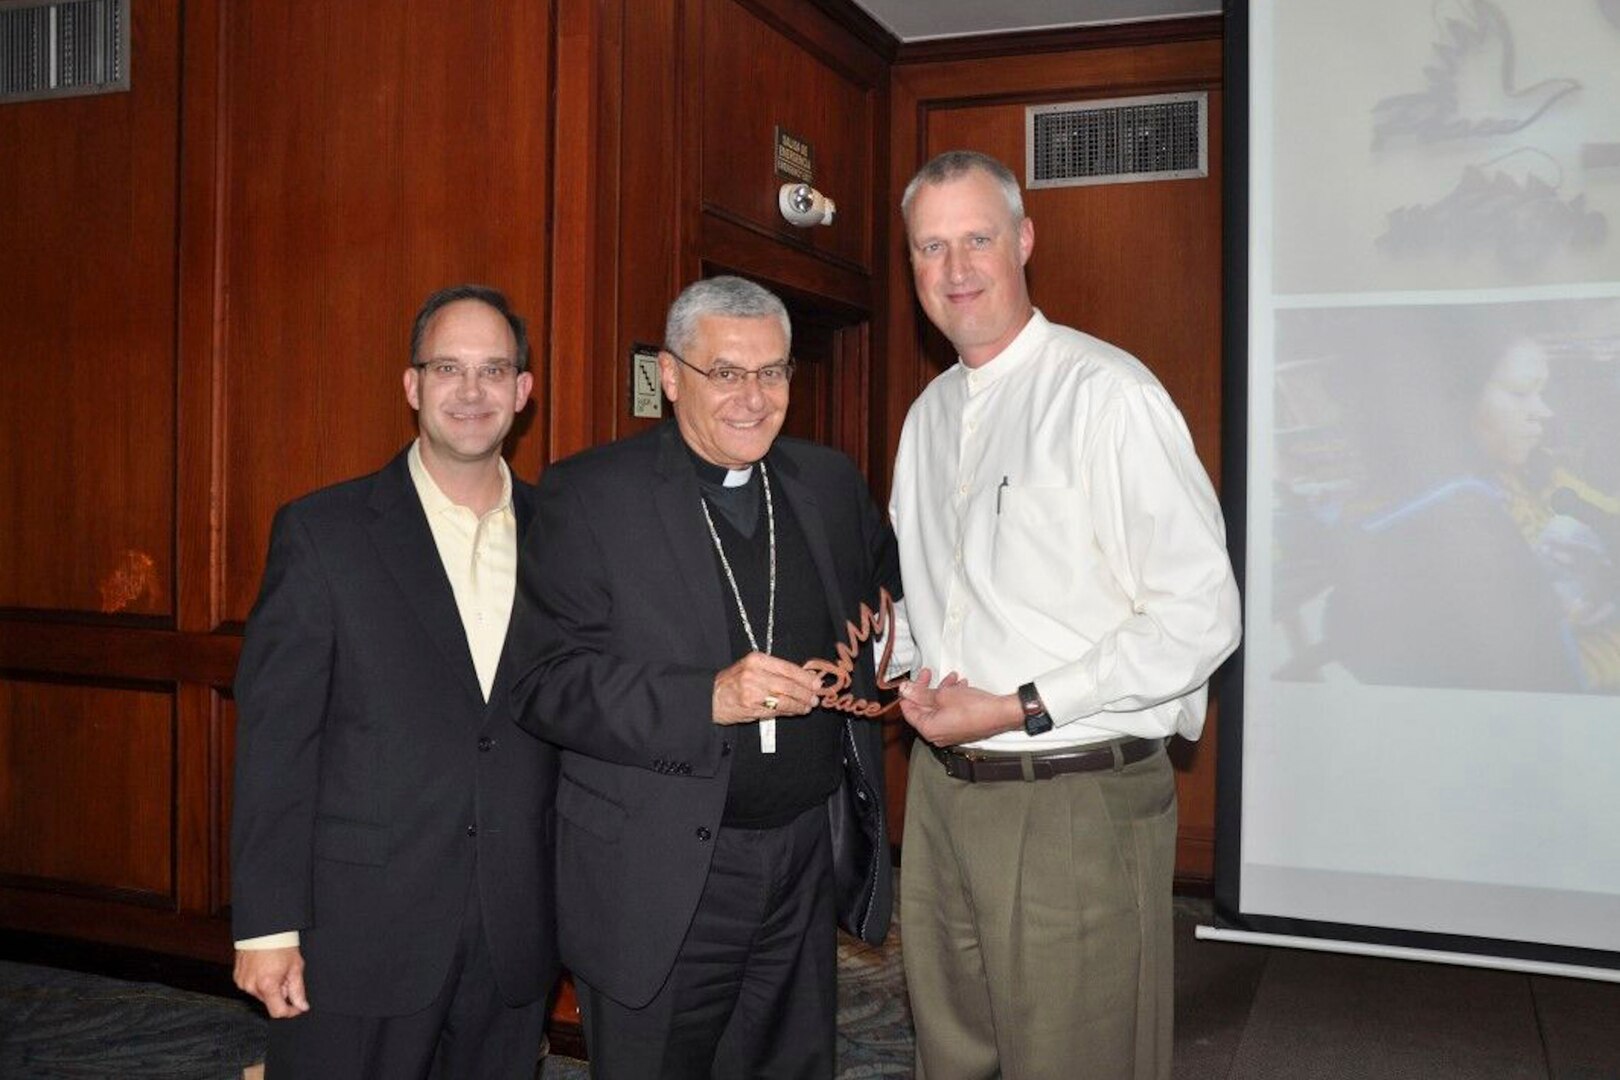 U.S. Air Force Chaplain, Lt. Col. Brian Bohlman and Master Sgt. Charles Williams, chaplain assistant, give Monsignor Fabio Suescun Mutis, Archbishop for the Colombian Military, a peace dove during a three-day symposium in Bogota, Colombia, July 13-16, 2015.  The symposium was an opportunity to share with other nations ideas on how religion matters to military commanders, service members and their families.